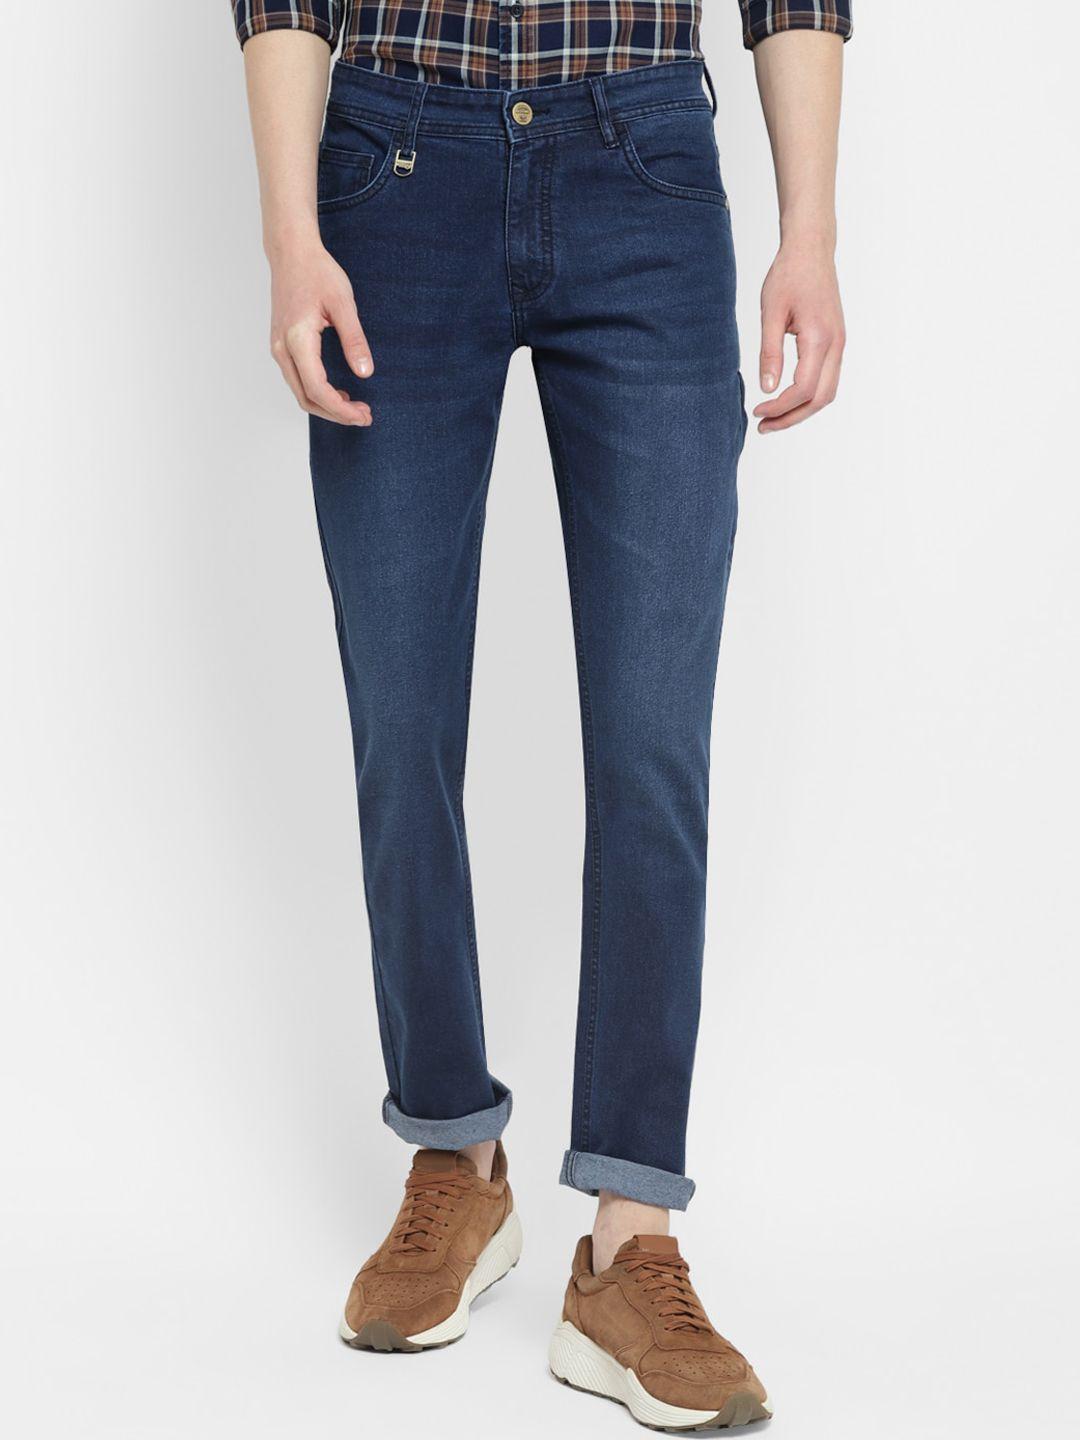 red-chief-men-slim-fit-light-fade-jeans